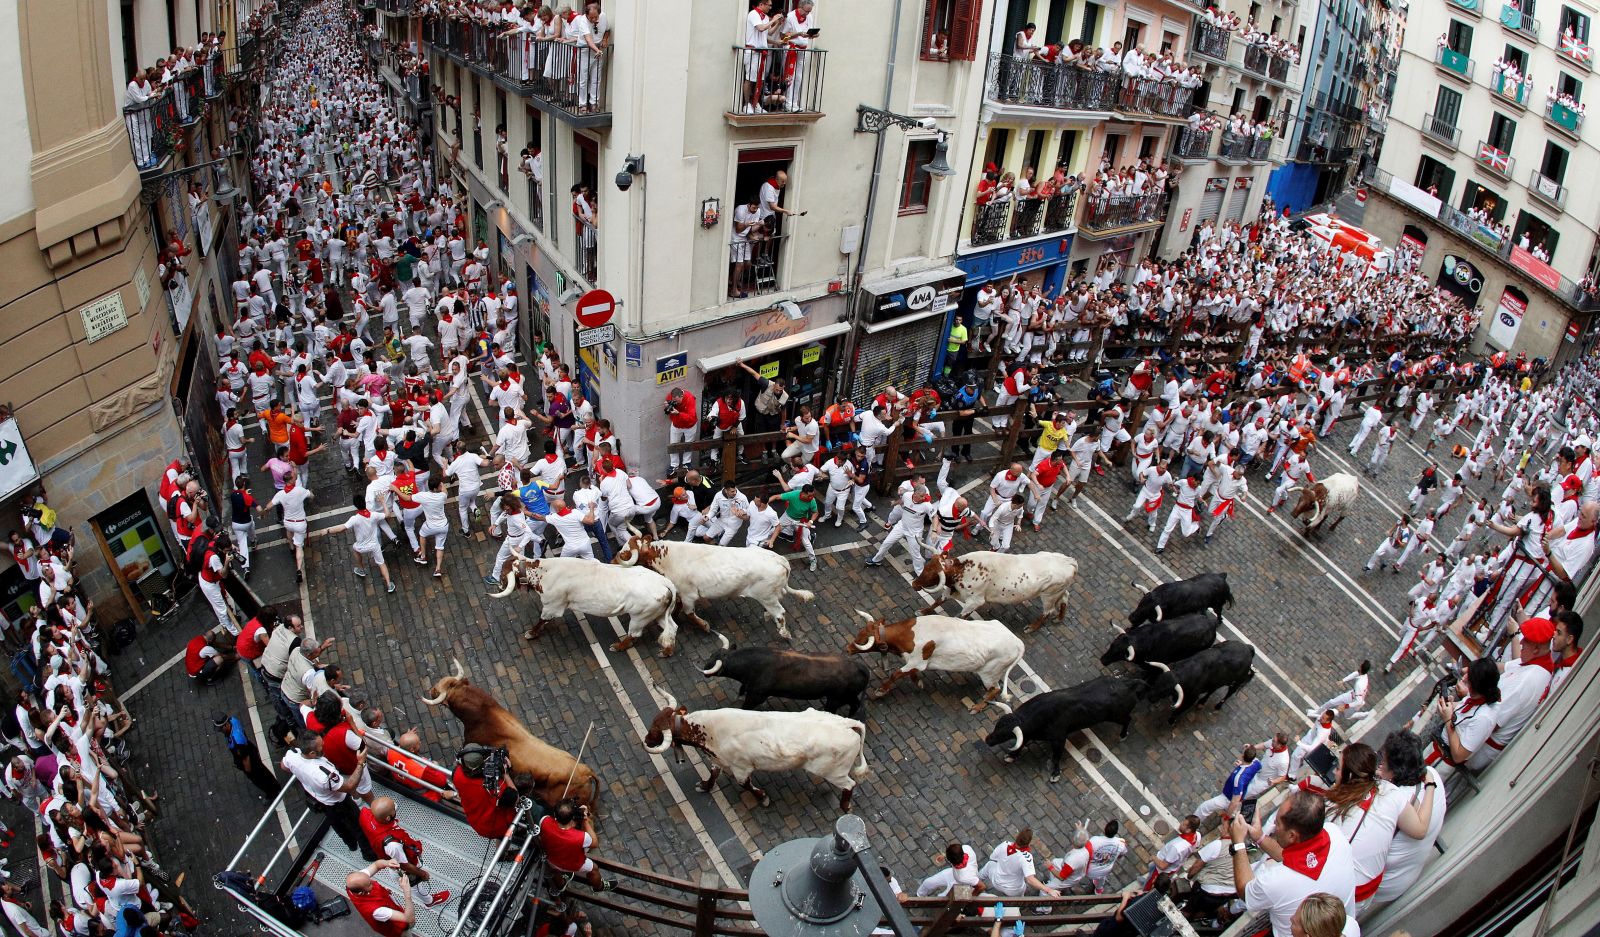 epa09161468 (FILE) - Runners triy to avoid bulls as they run down a street during the traditional San Fermin bull run in Pamplona, Spain, 07 July 2019 (reissued 26 April 2021). According to the mayor of Pamplona, the Sanfermines 2020 festival was canceled due to the coronavirus pandemic for the second consecutive year.  EPA/VILLAR LOPEZ *** Local Caption *** 56037227